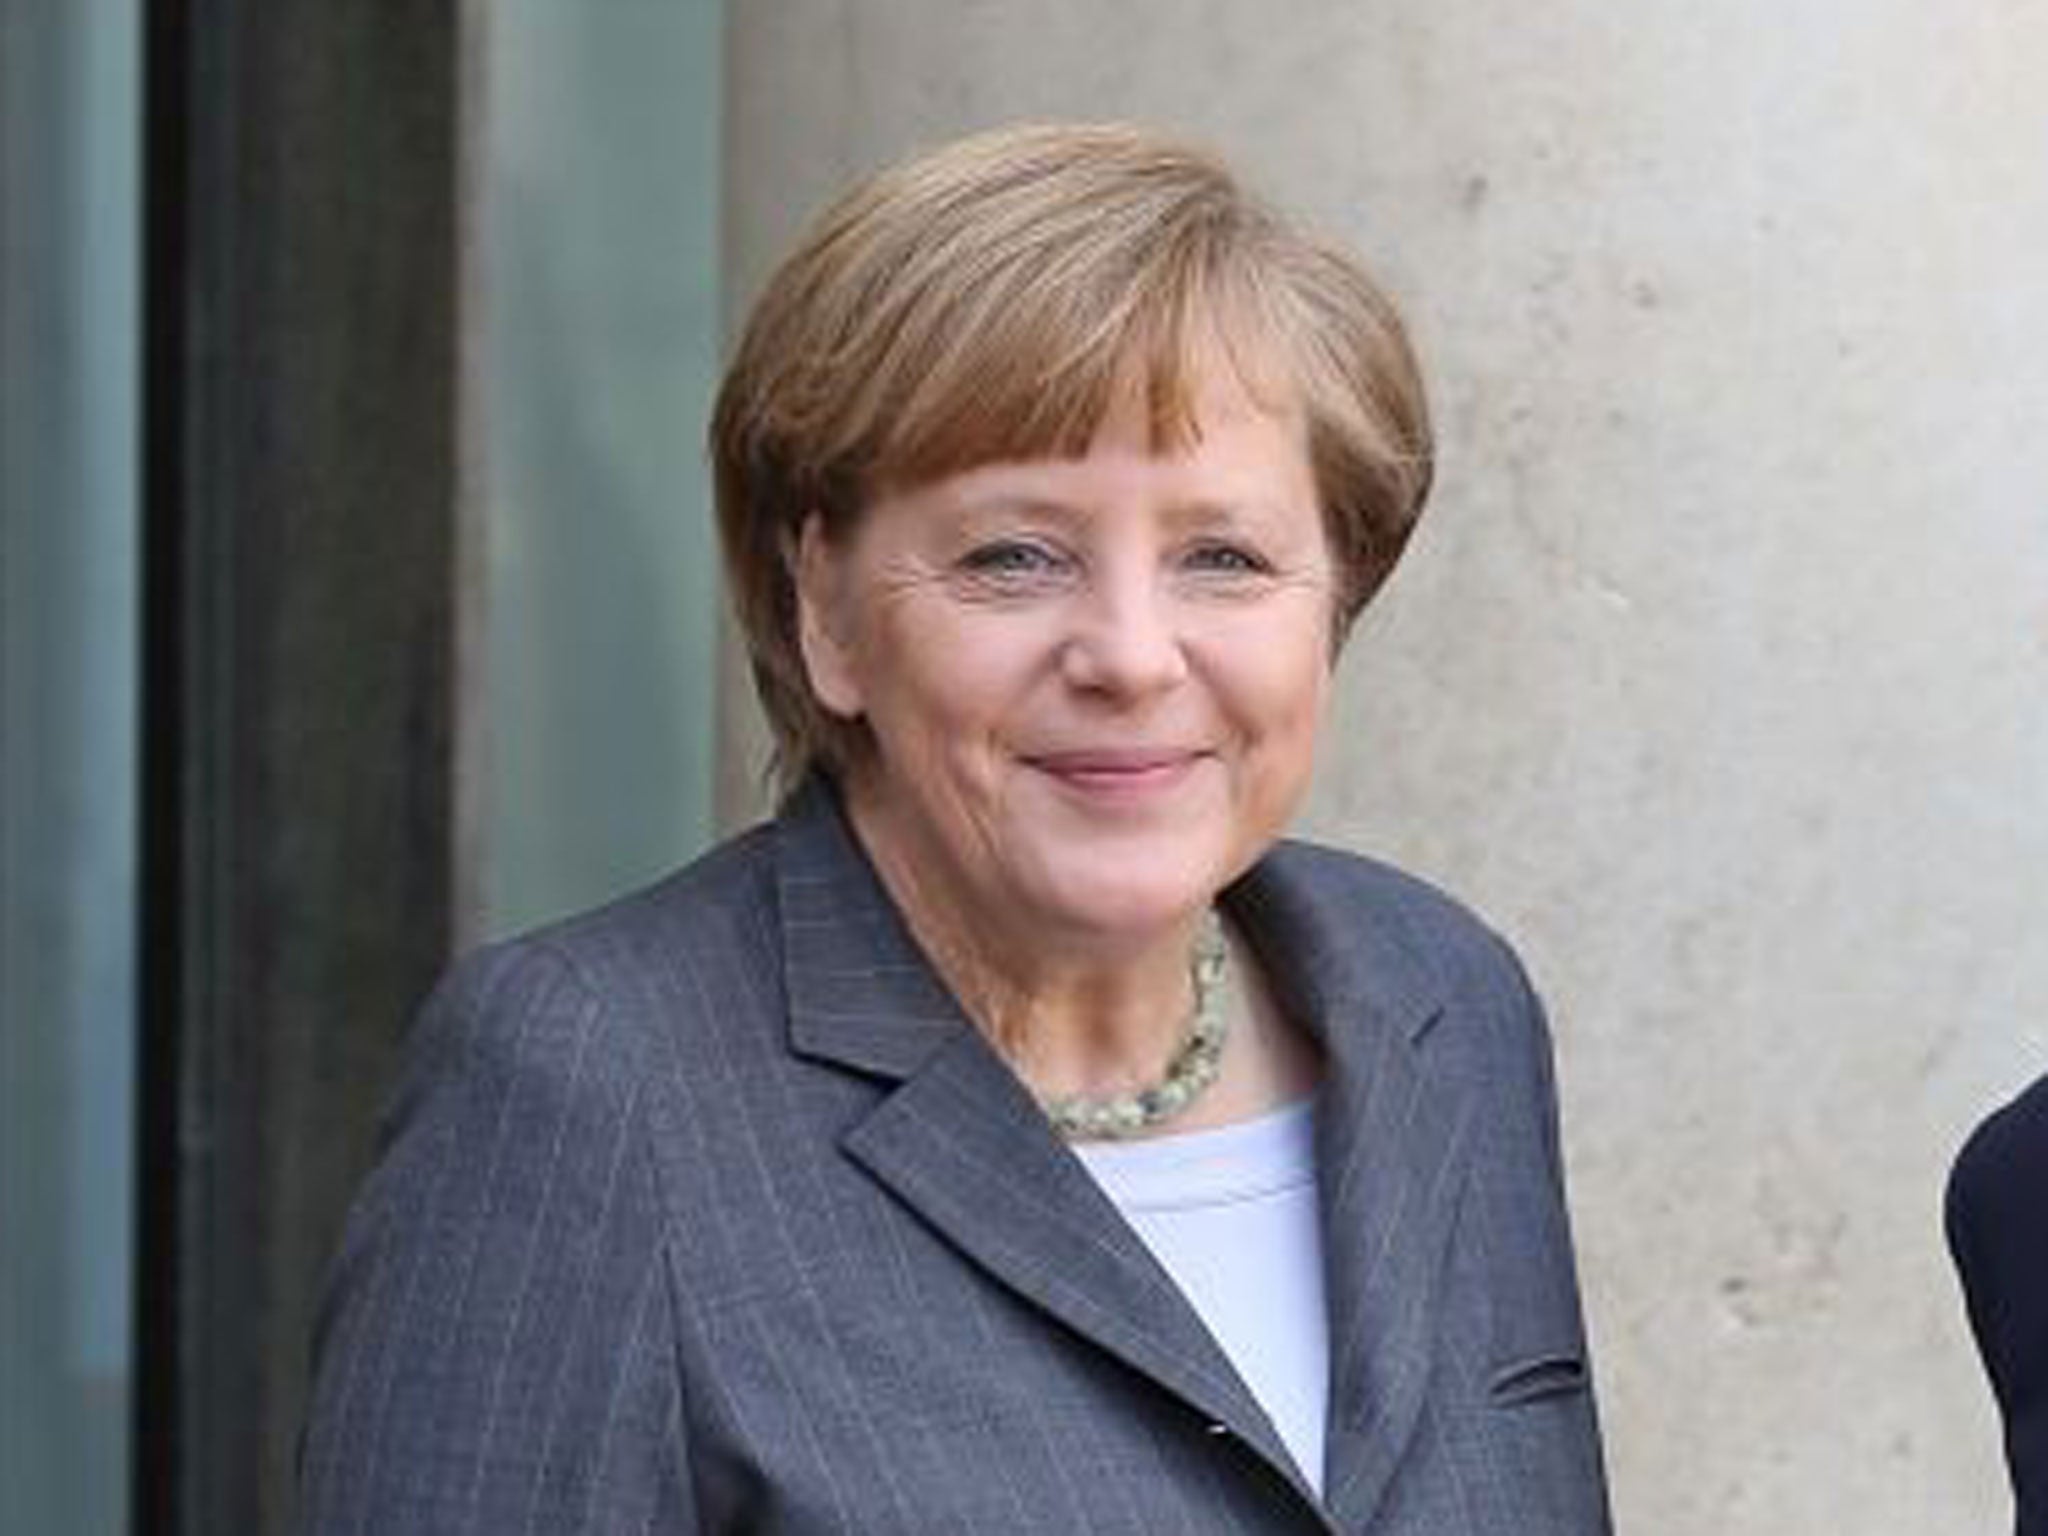 Germany is the great economic anchor of the eurozone, but as Angela Merkel noted in a speech last year, Germany’s strength is not infinite